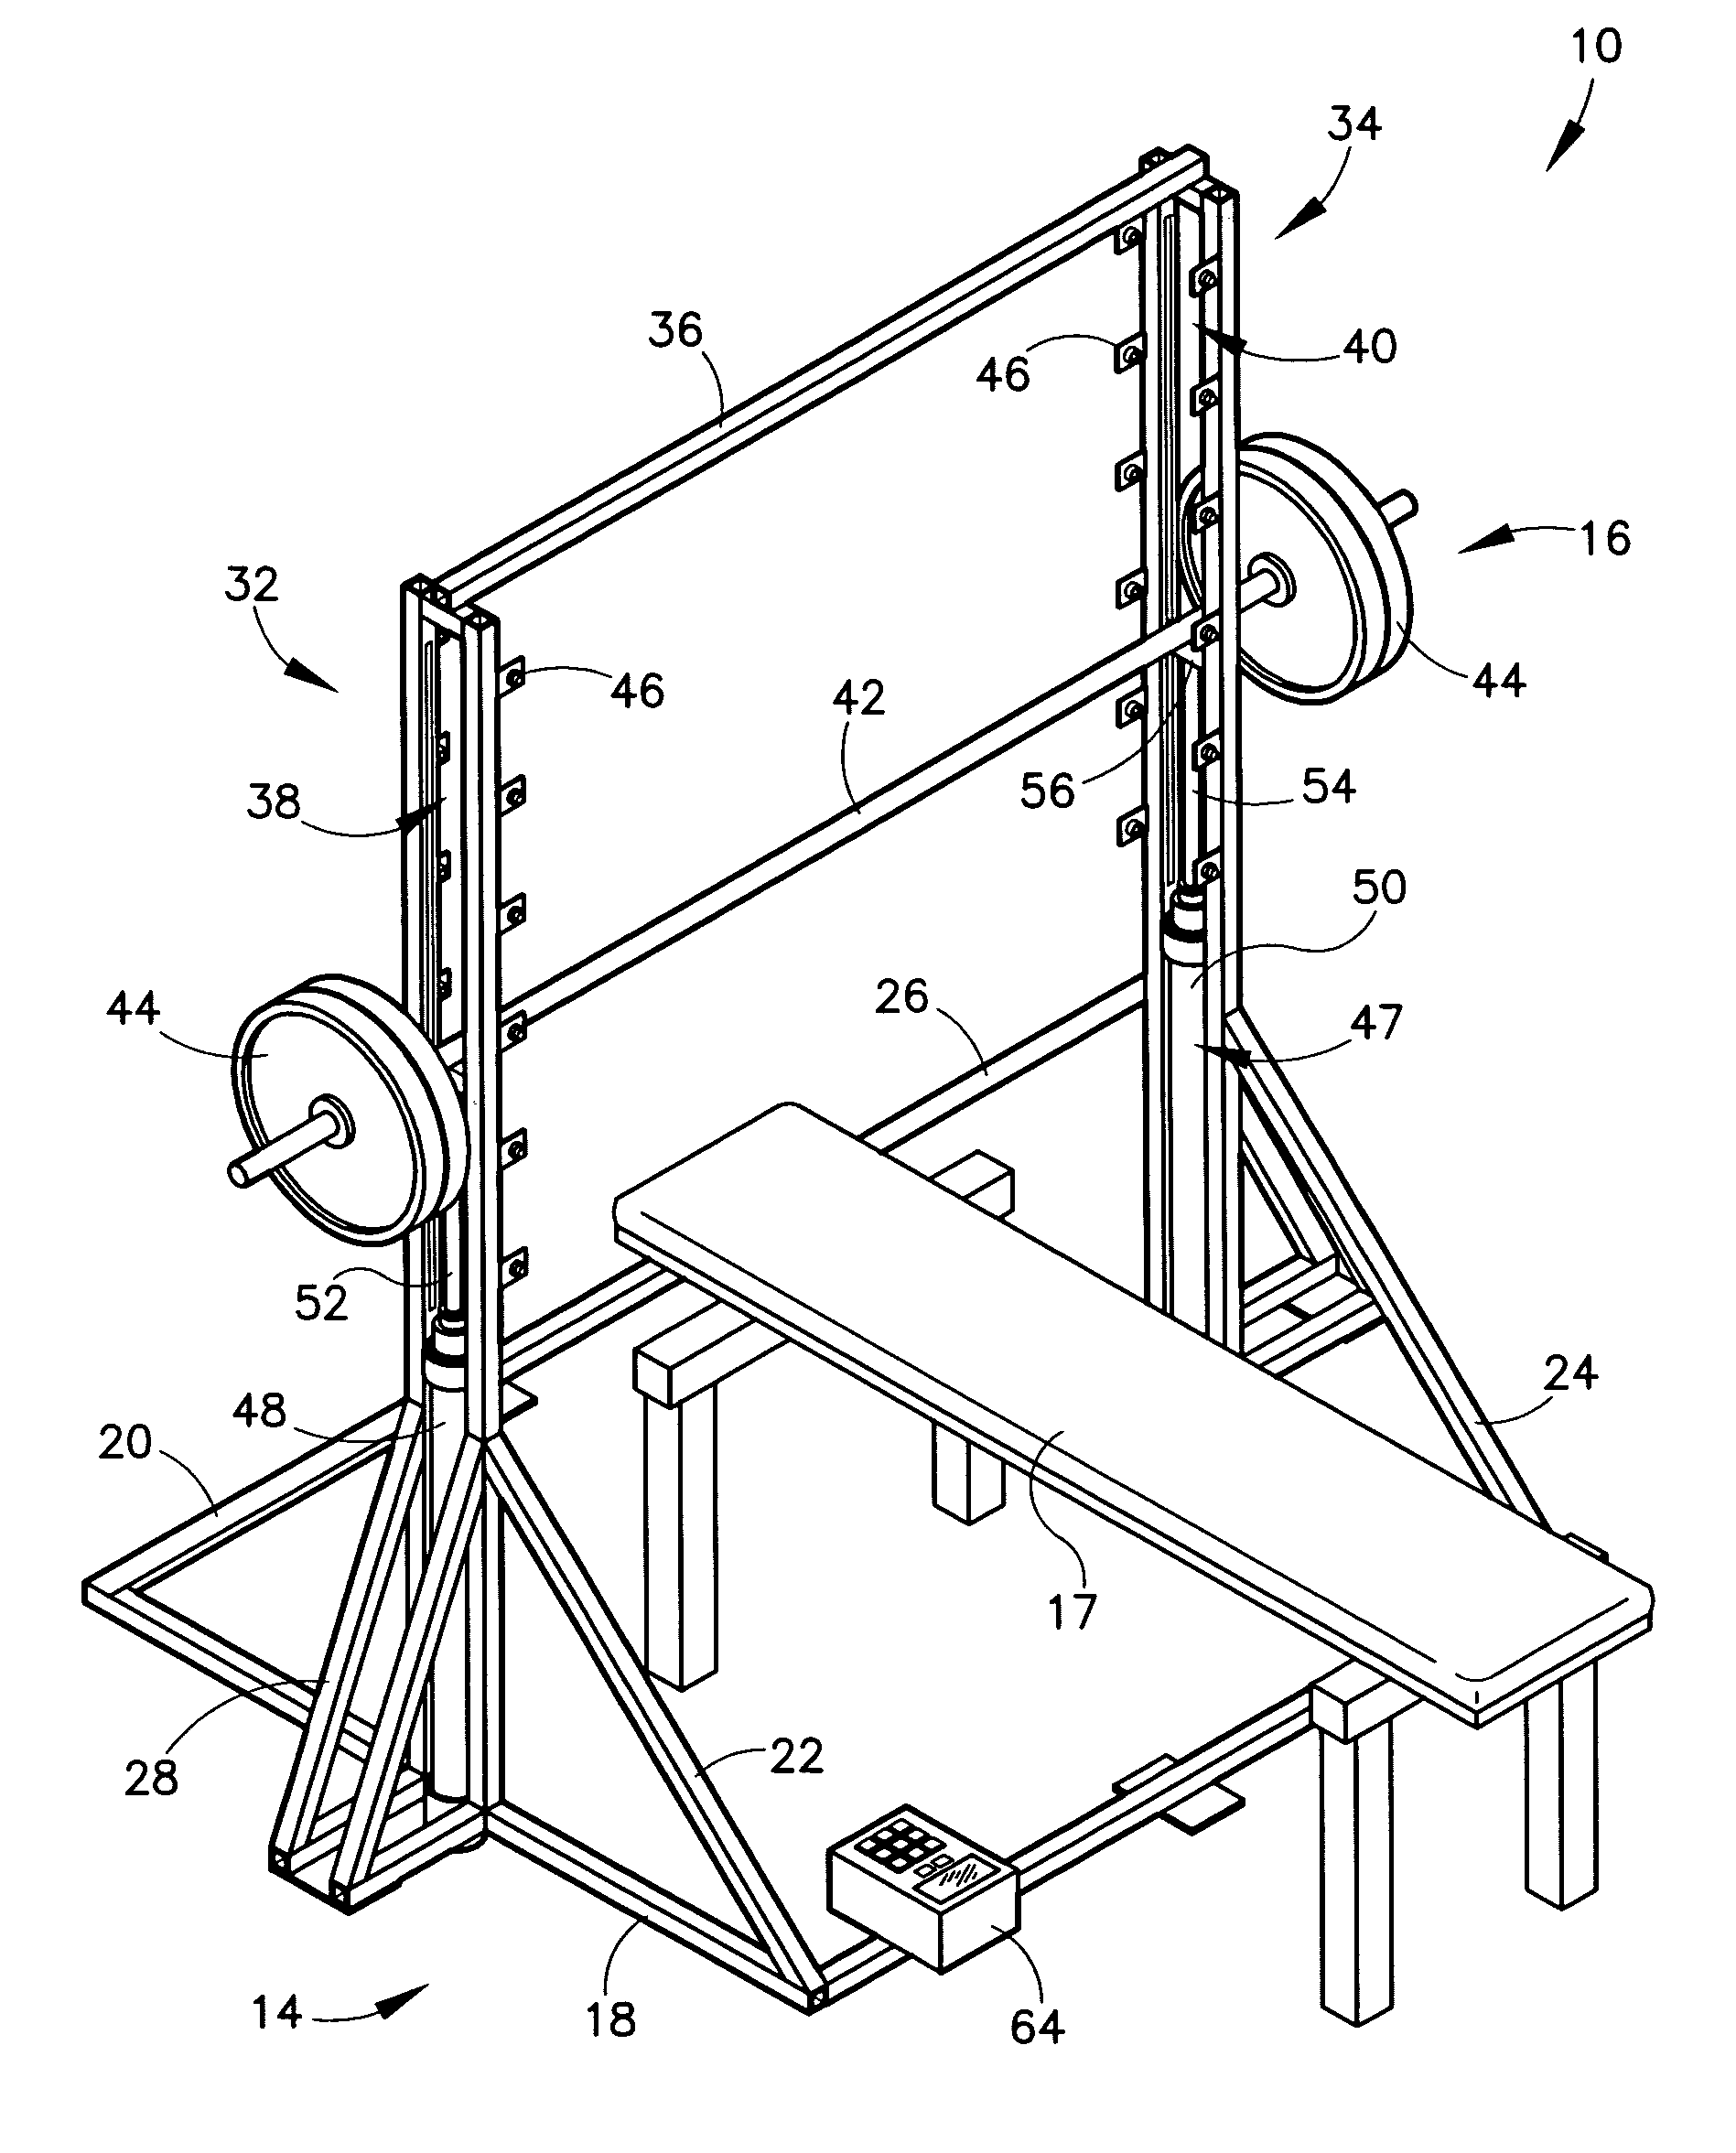 Apparatus and method for facilitating the safe lifting of free weights